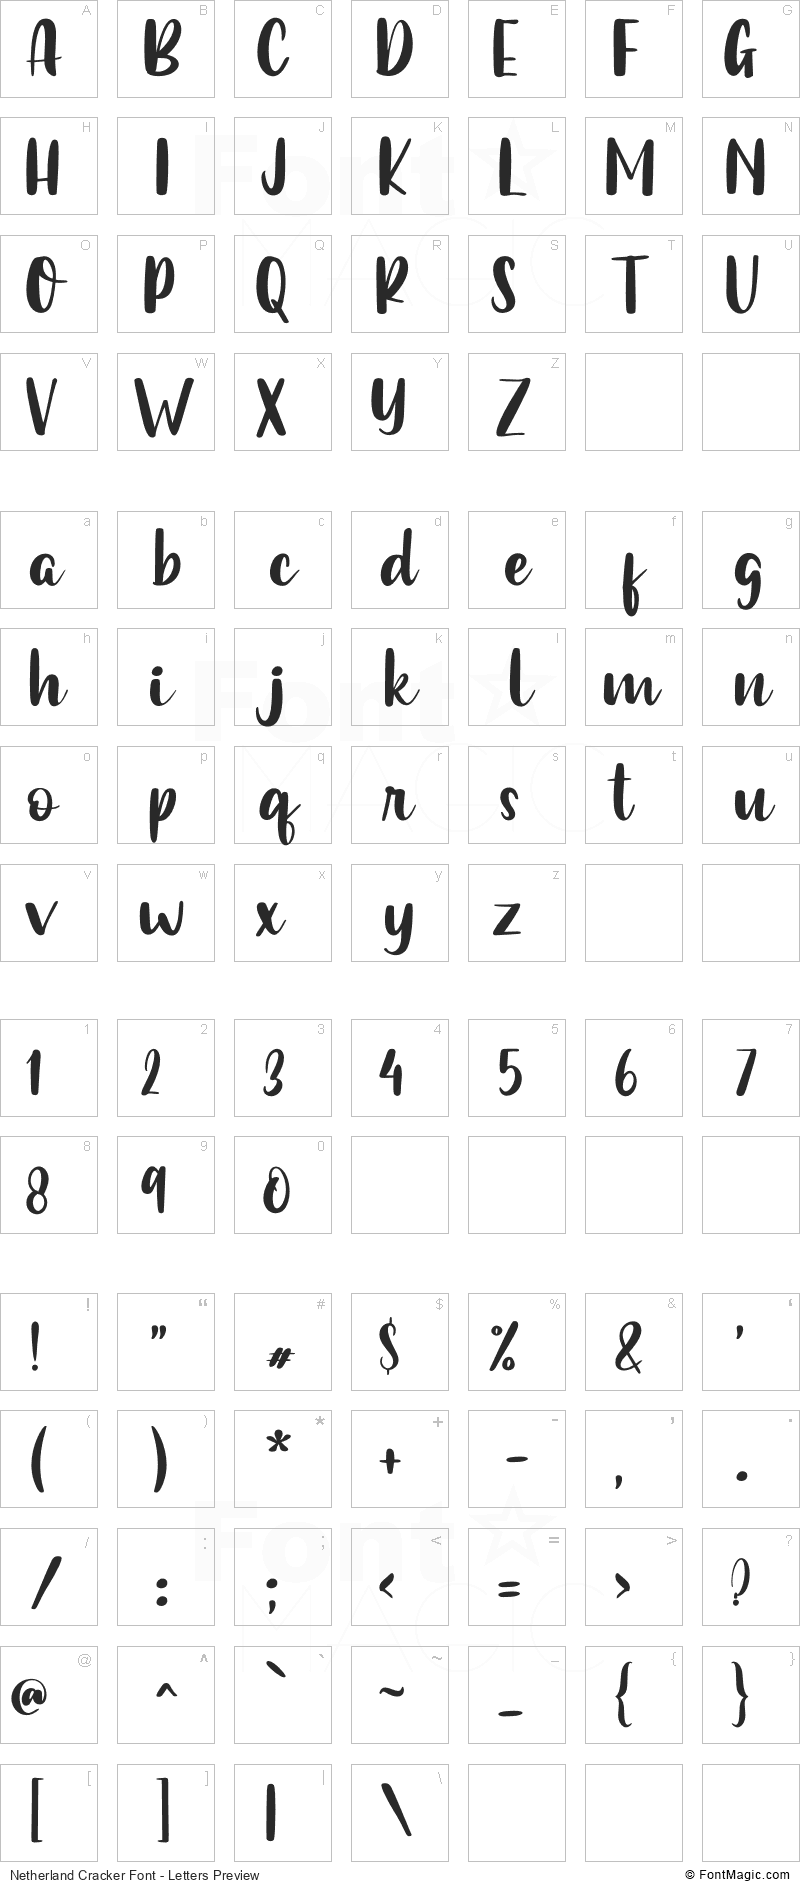 Netherland Cracker Font - All Latters Preview Chart